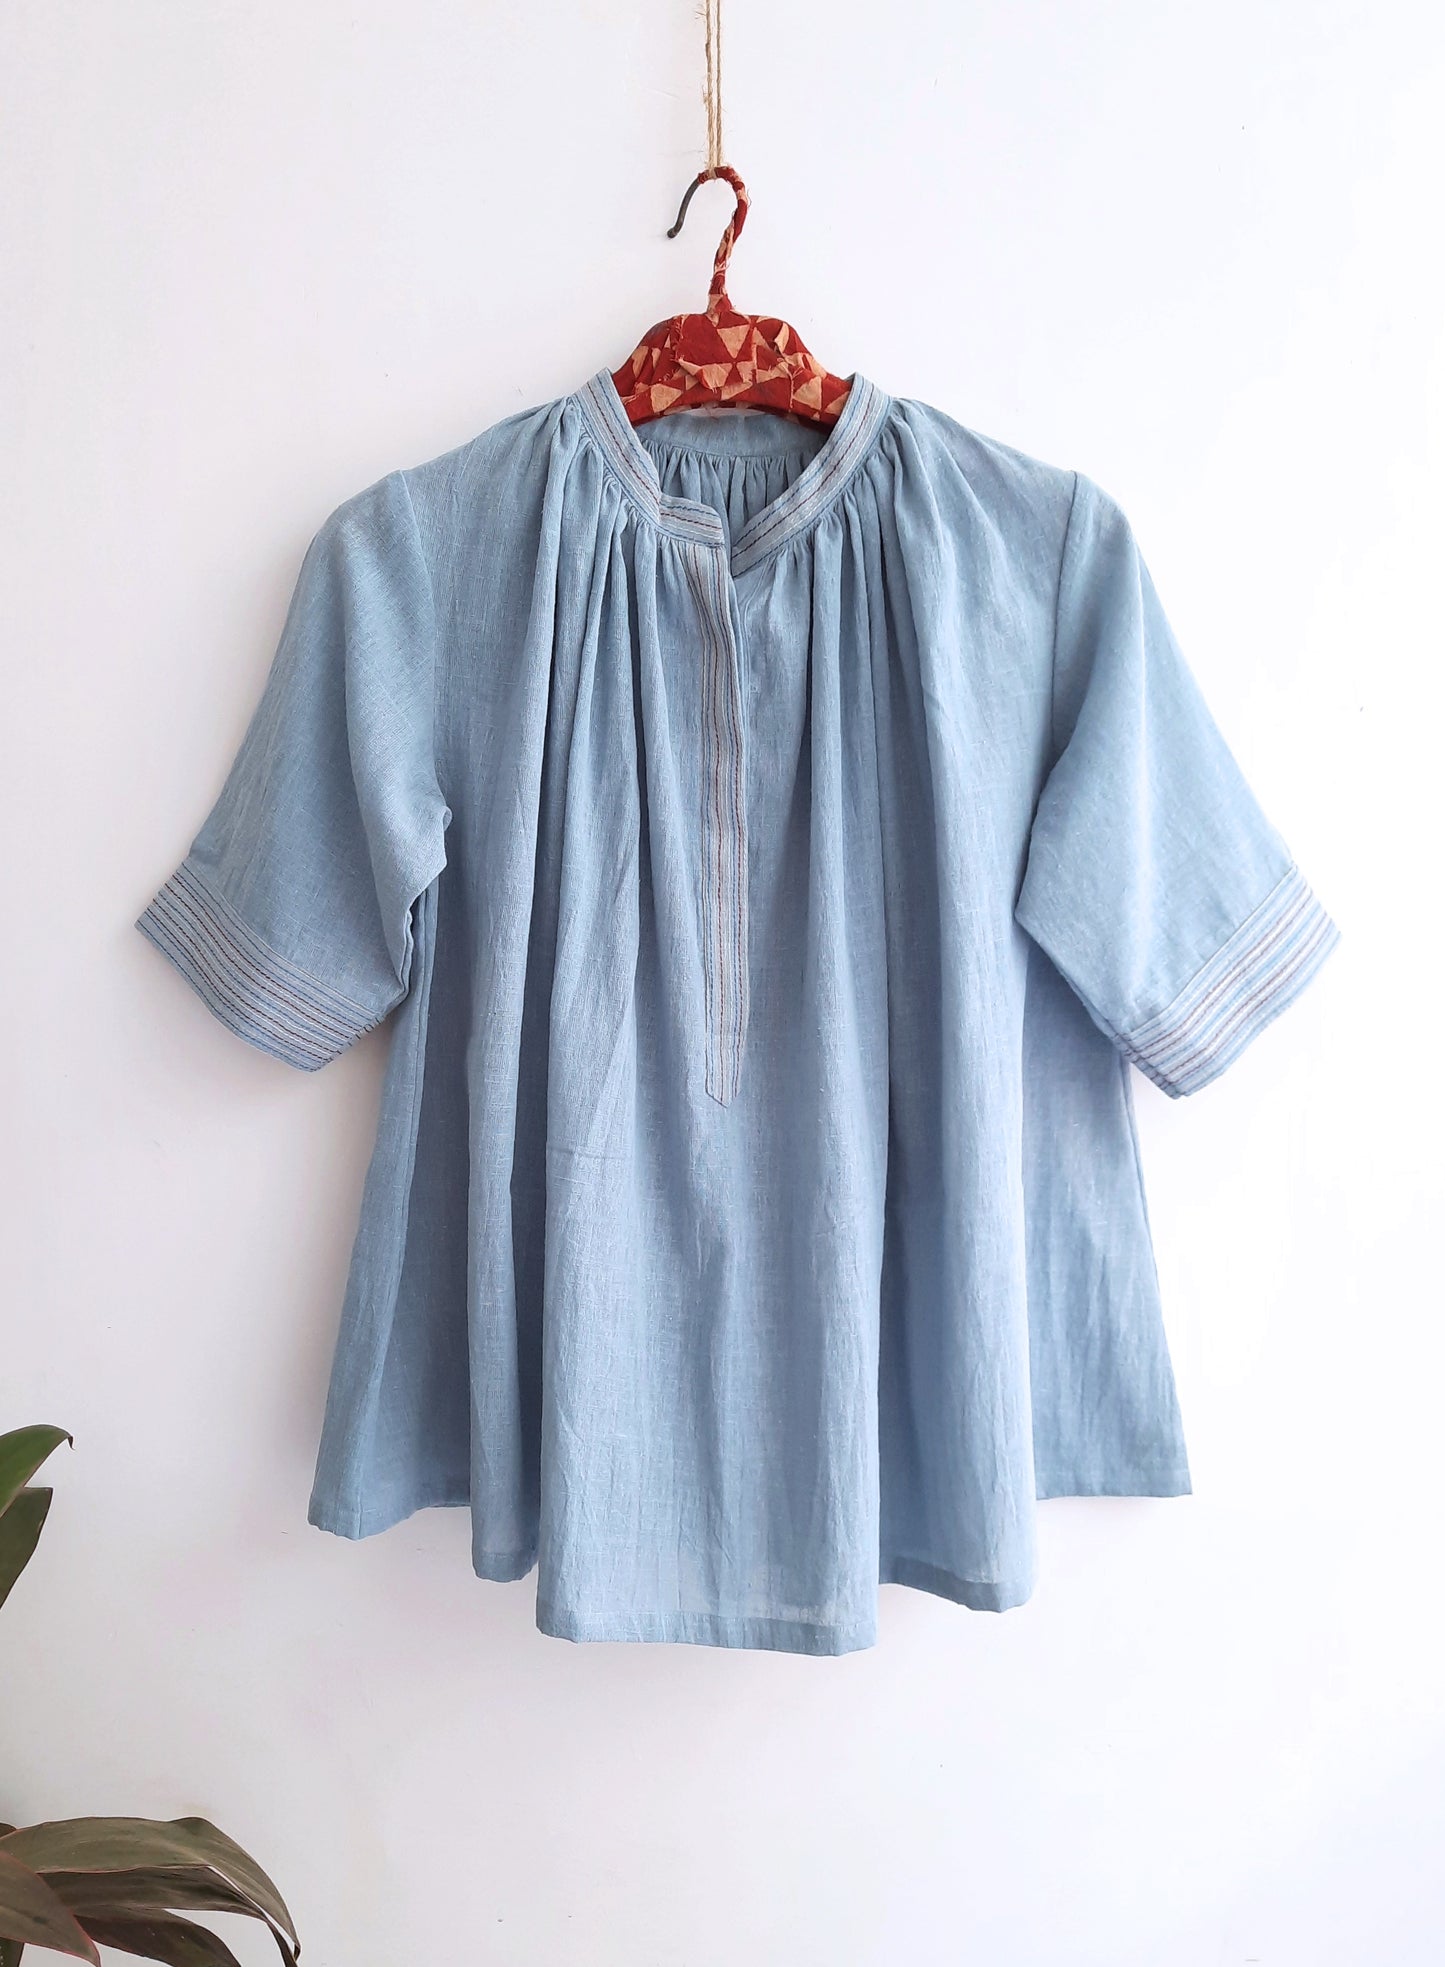 Summer indigo dyed organic cotton top for women, Handwoven top, Sustainable fashion